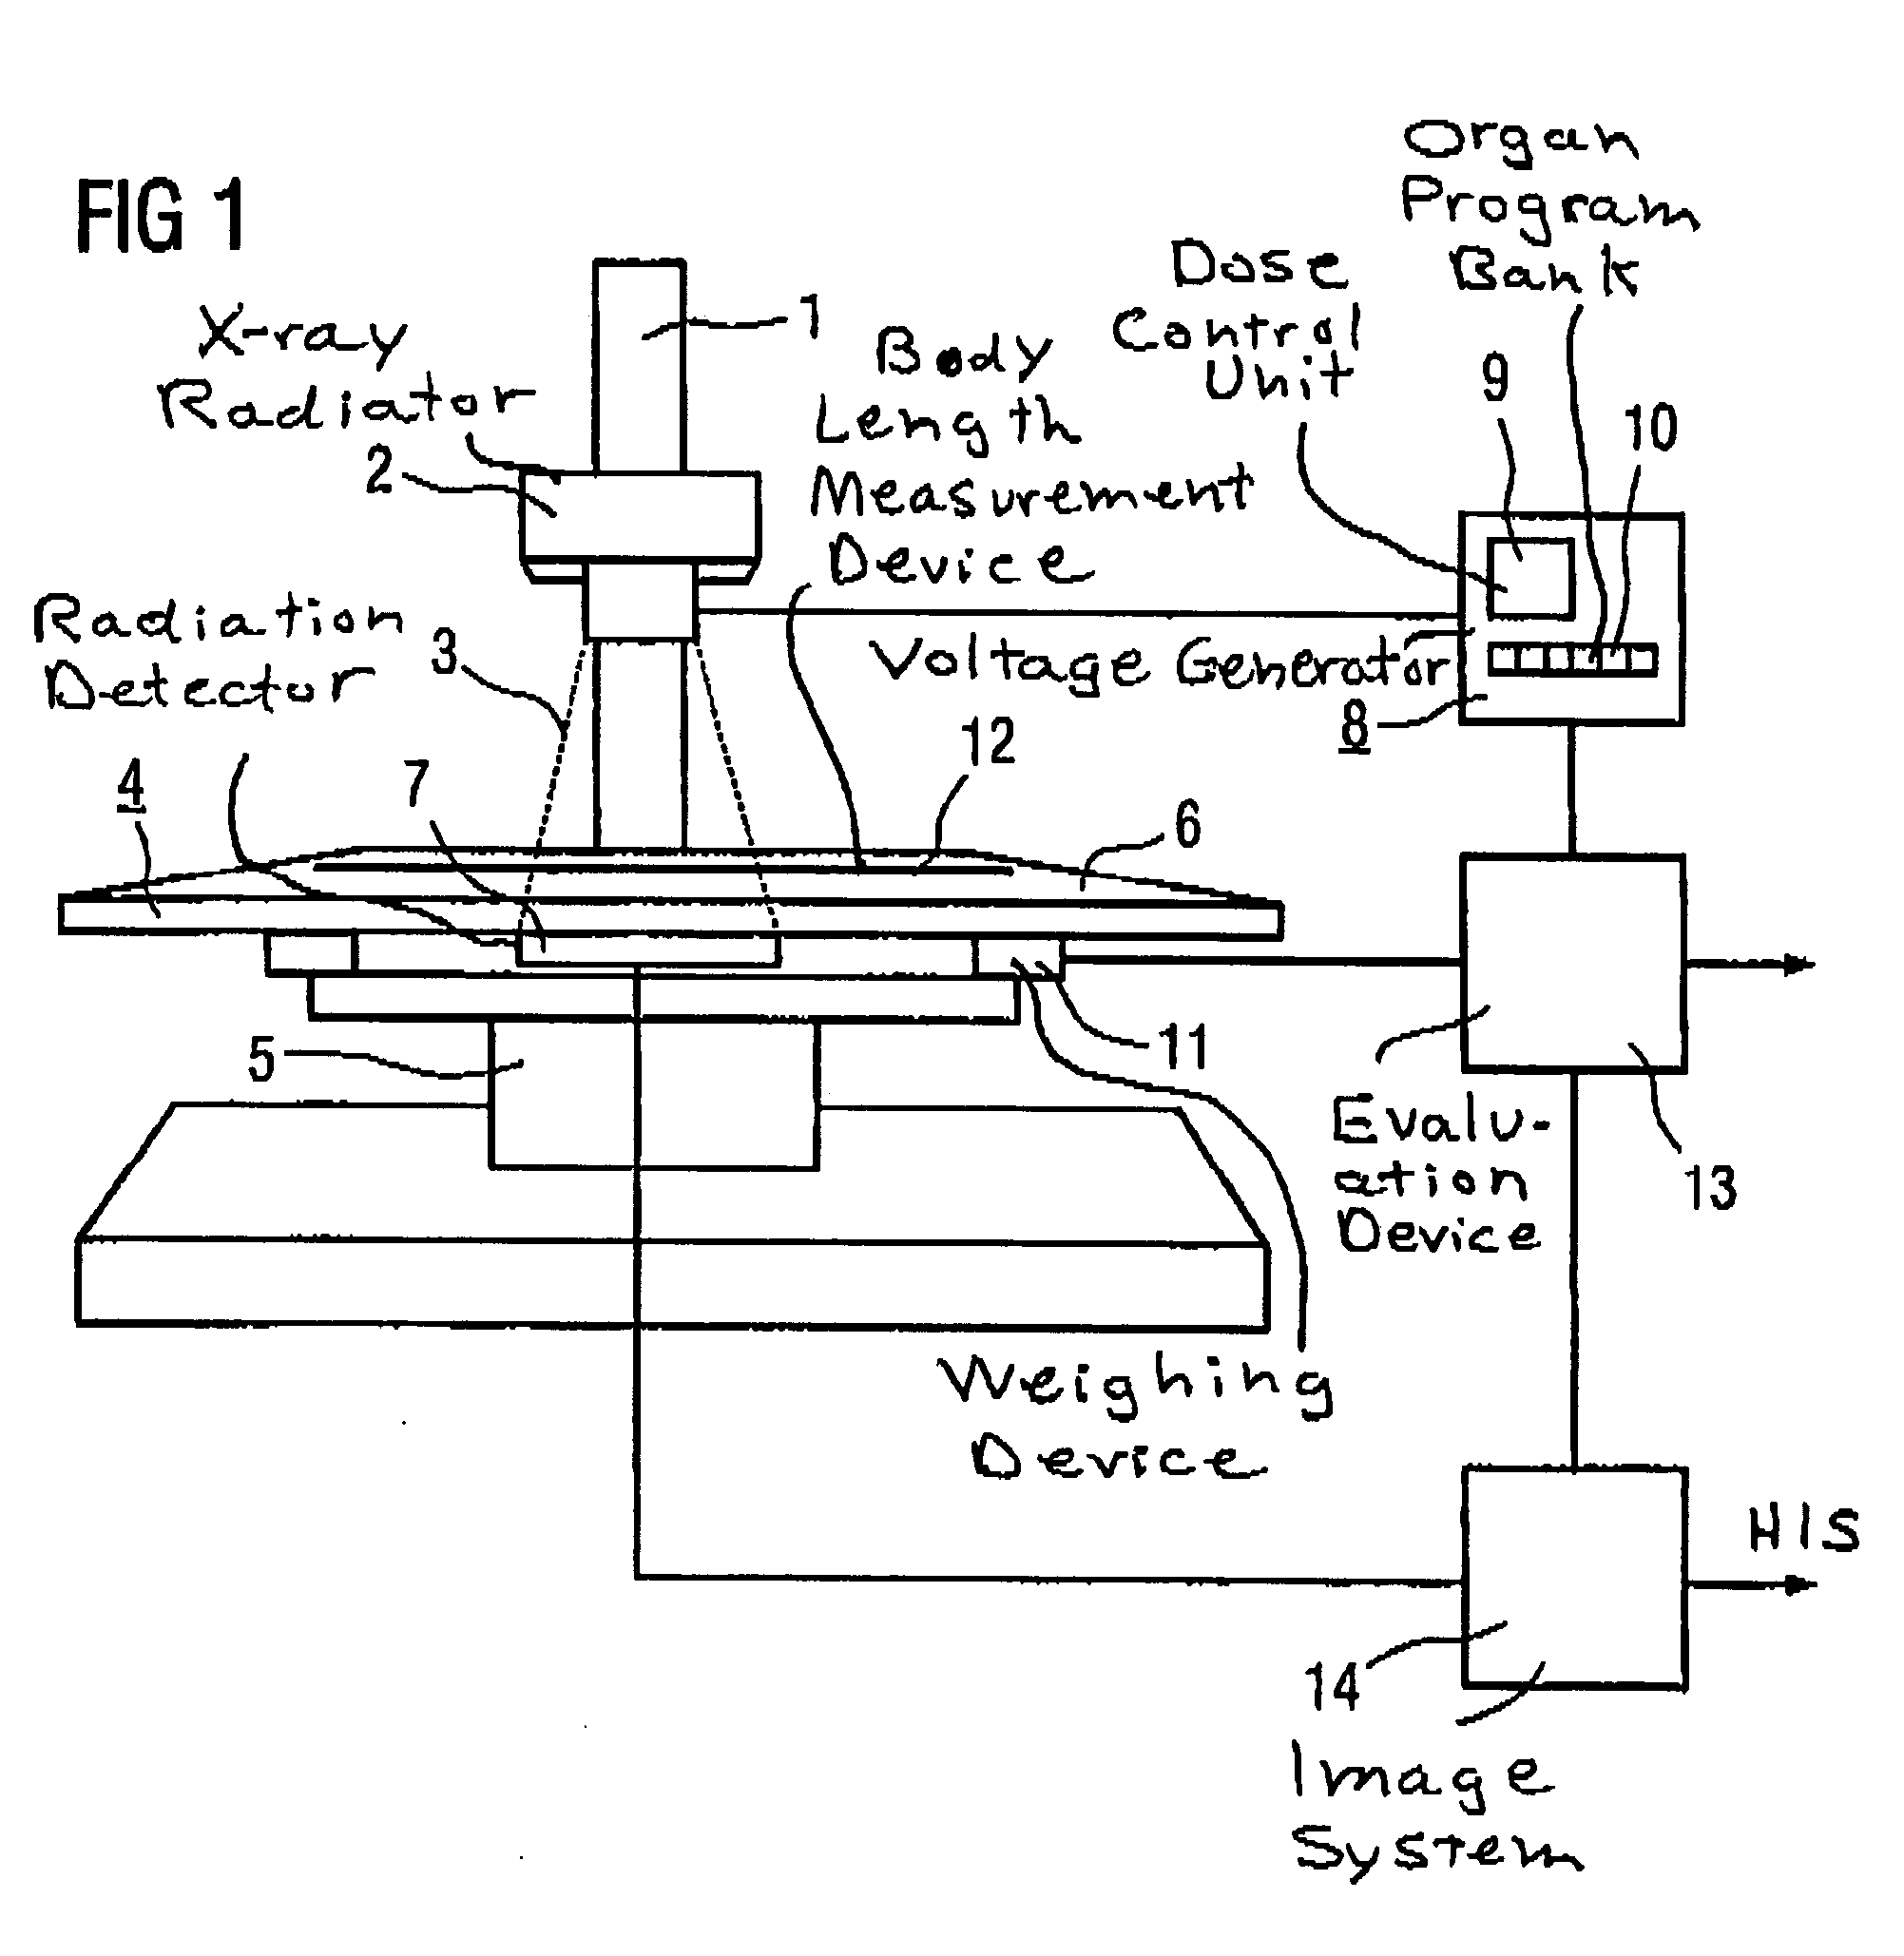 X-ray diagnostic apparatus with a body mass index calculator for controlling x-ray emissions